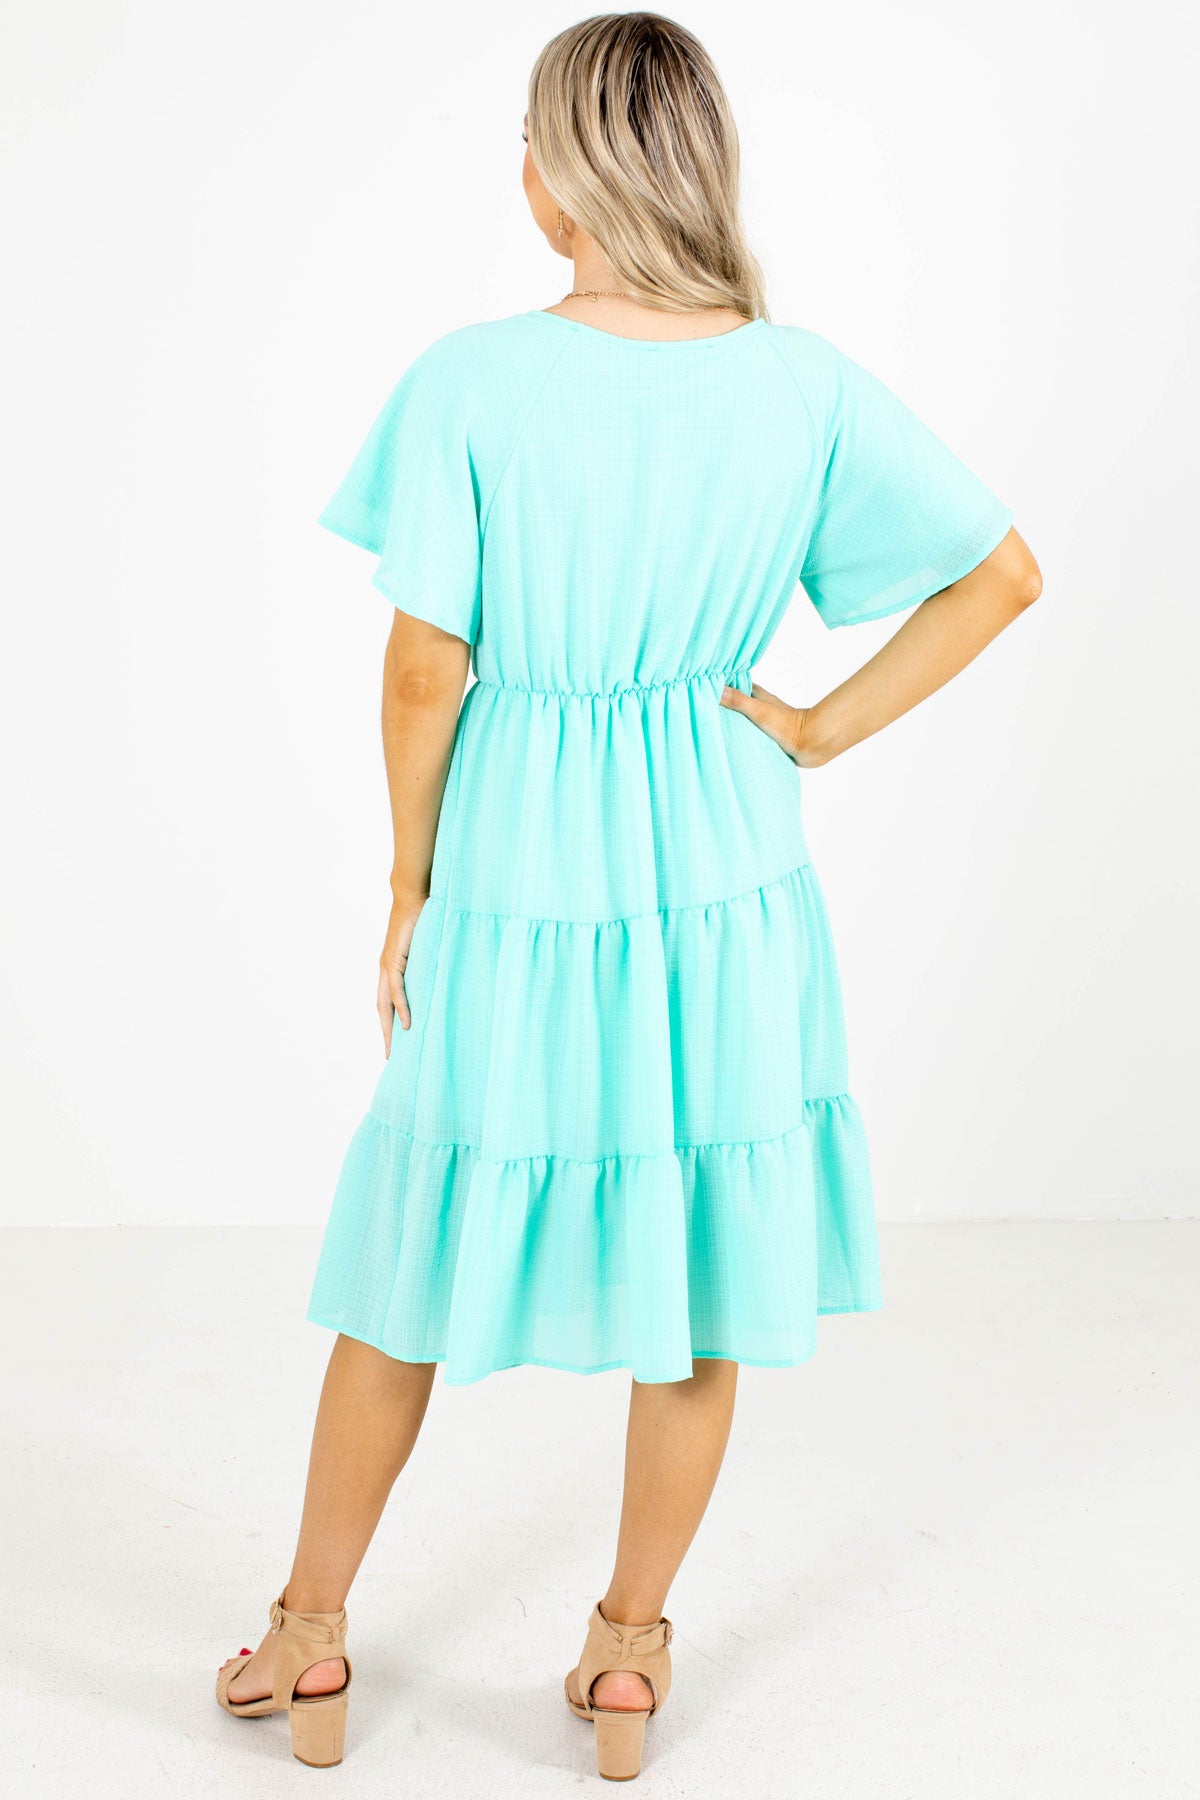 Bright Blue Midi Dress with Tiered Skirt.